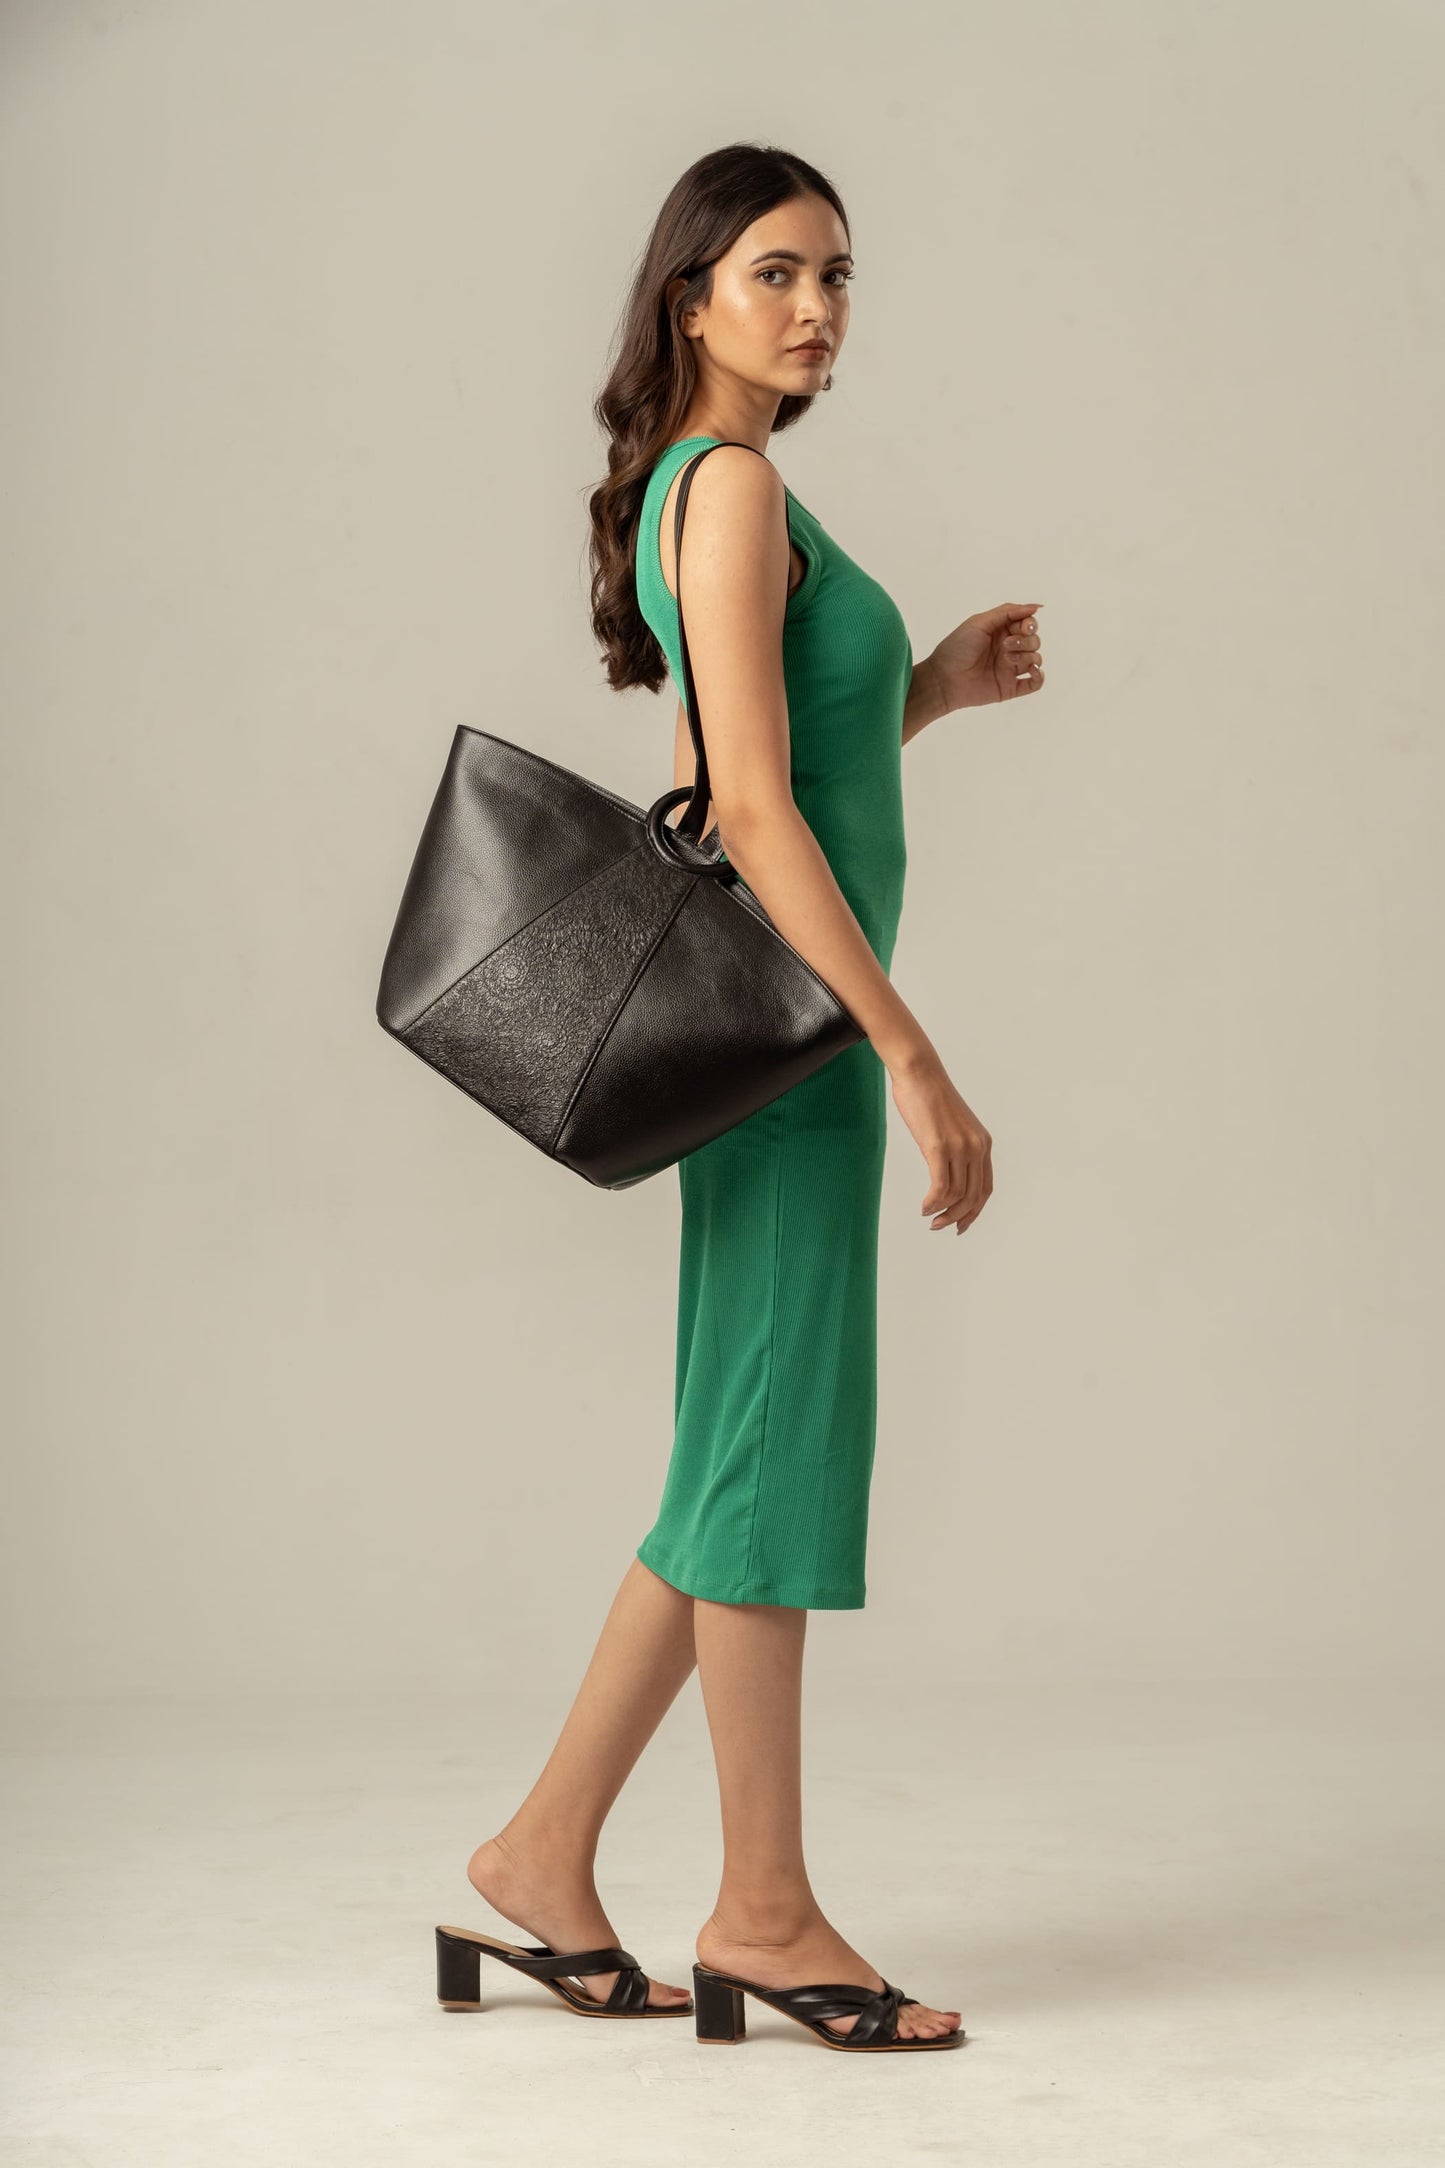 Suzhal- Everyday Tote in Cool Charcoal